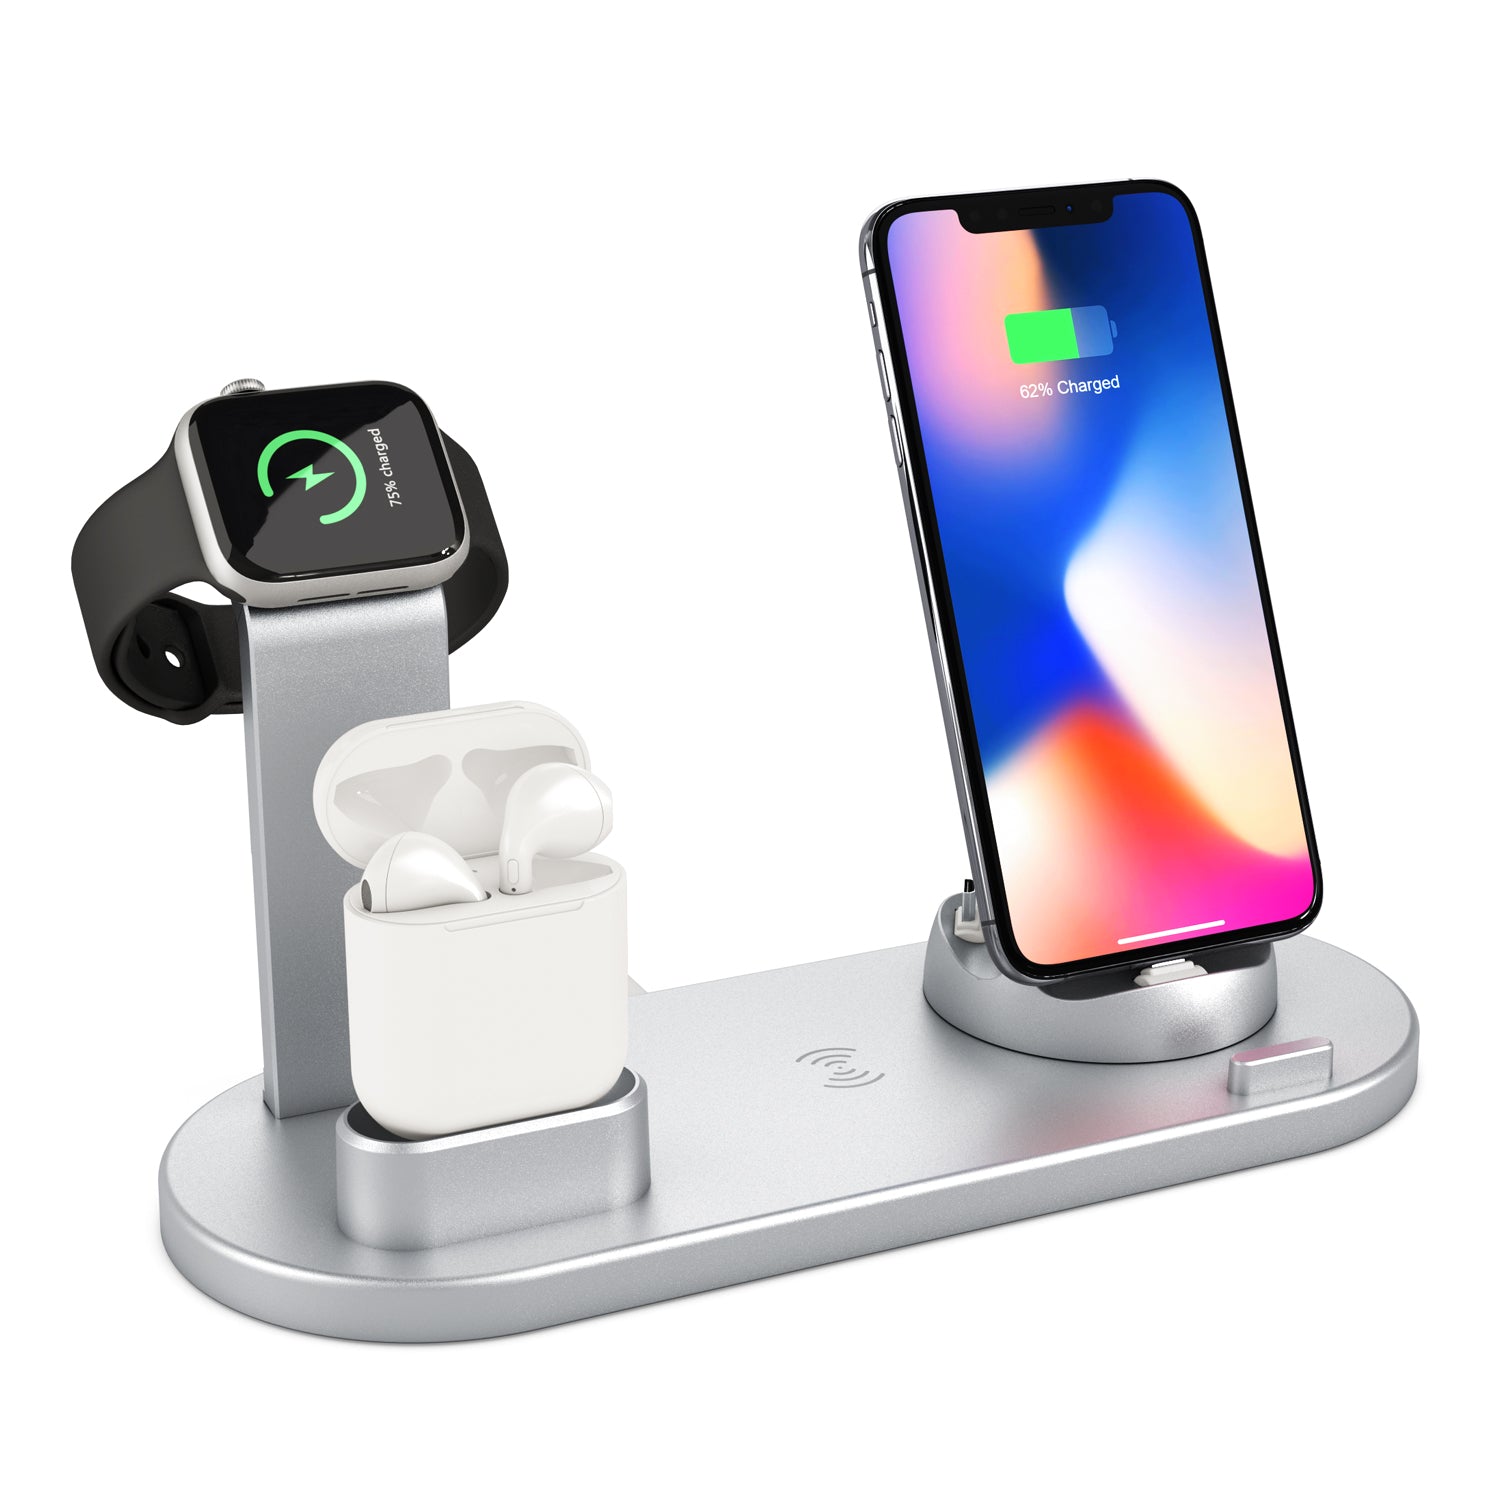 Wireless Charger Stand for Apple Watch - 3 in 1 Charging Solution